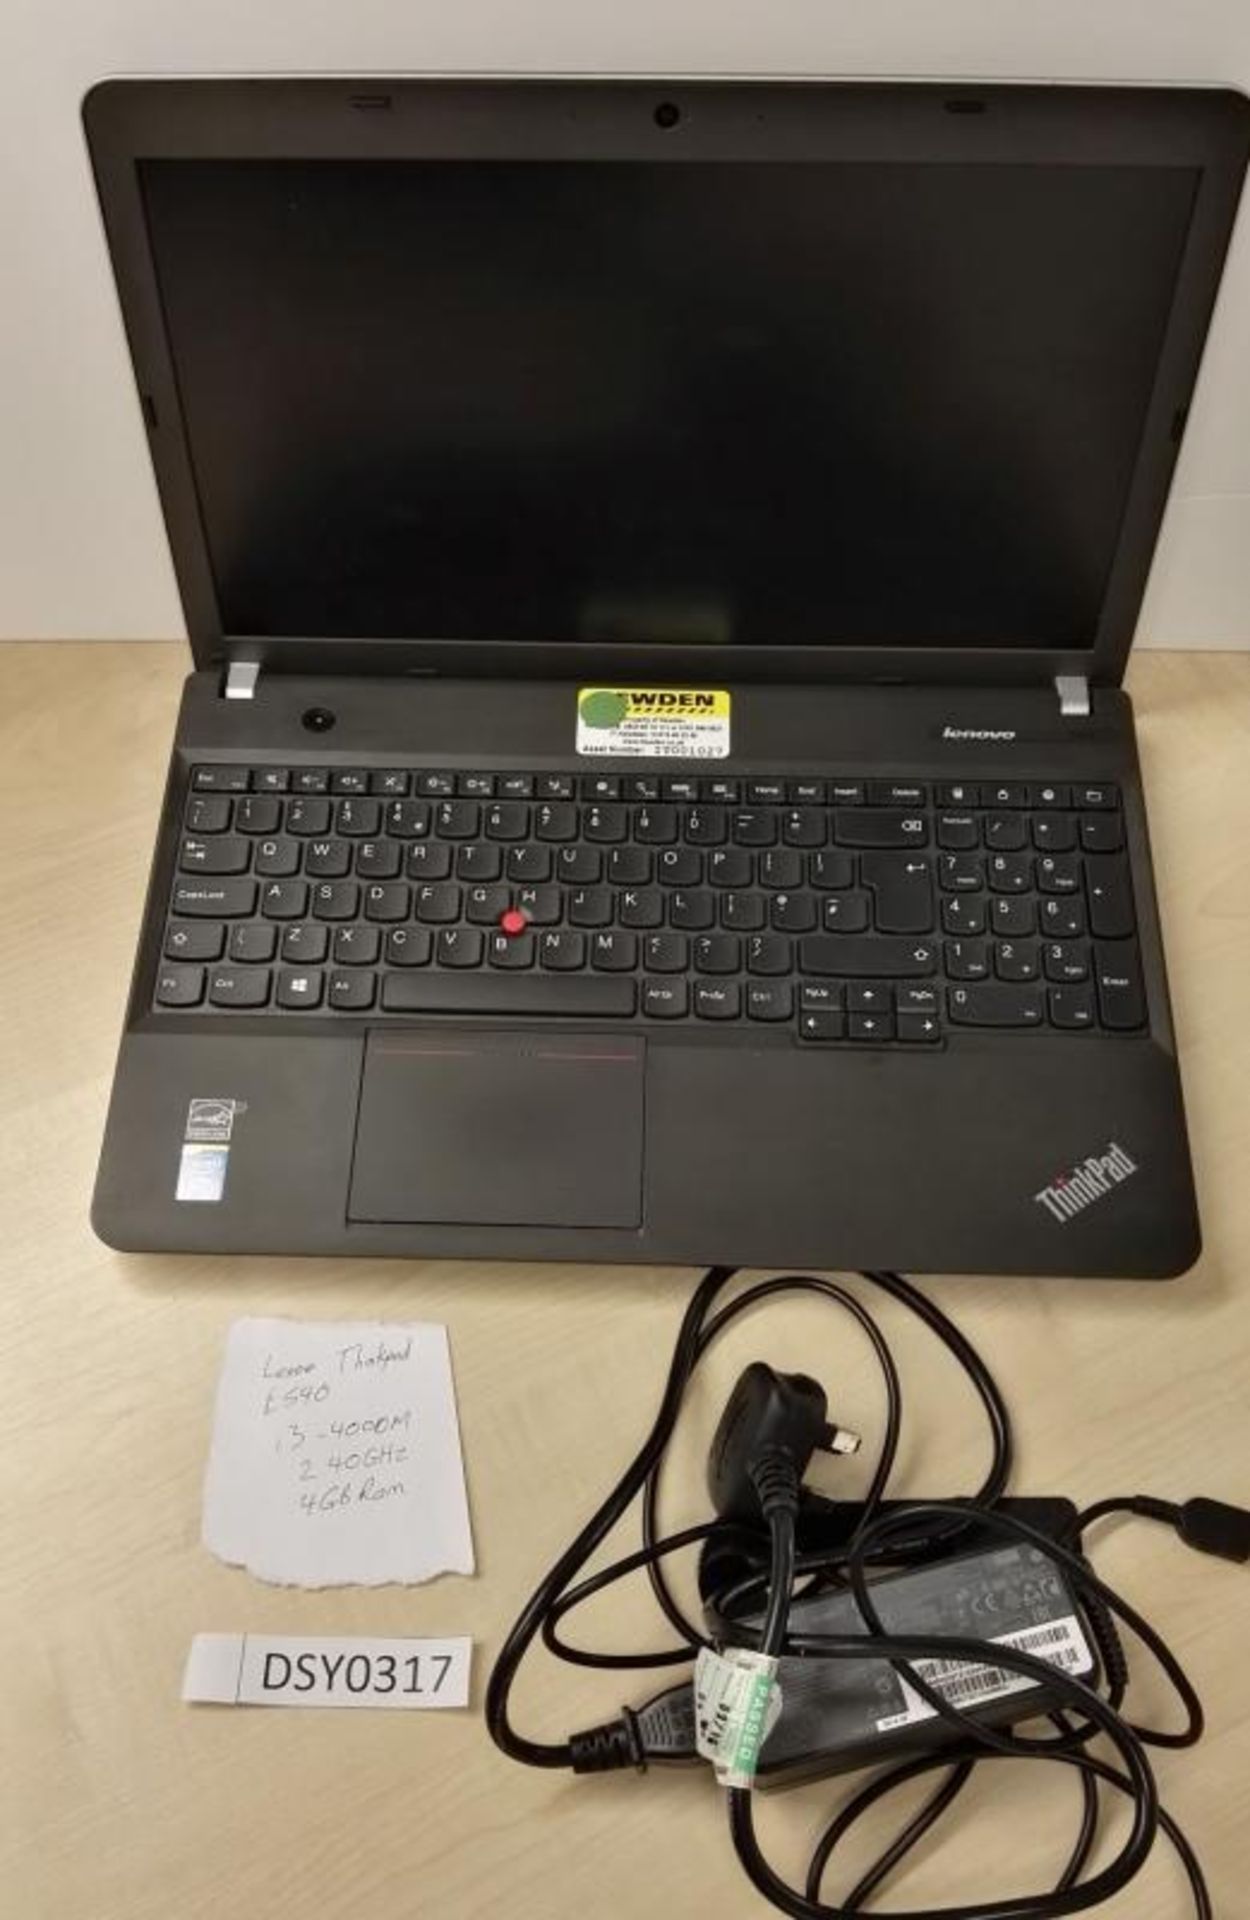 1 x Lenovo Thinkpad E540 i3 Laptop Computer - Features a 15.6 Inch Screen, Intel i3-4000M 2.4GHz Pro